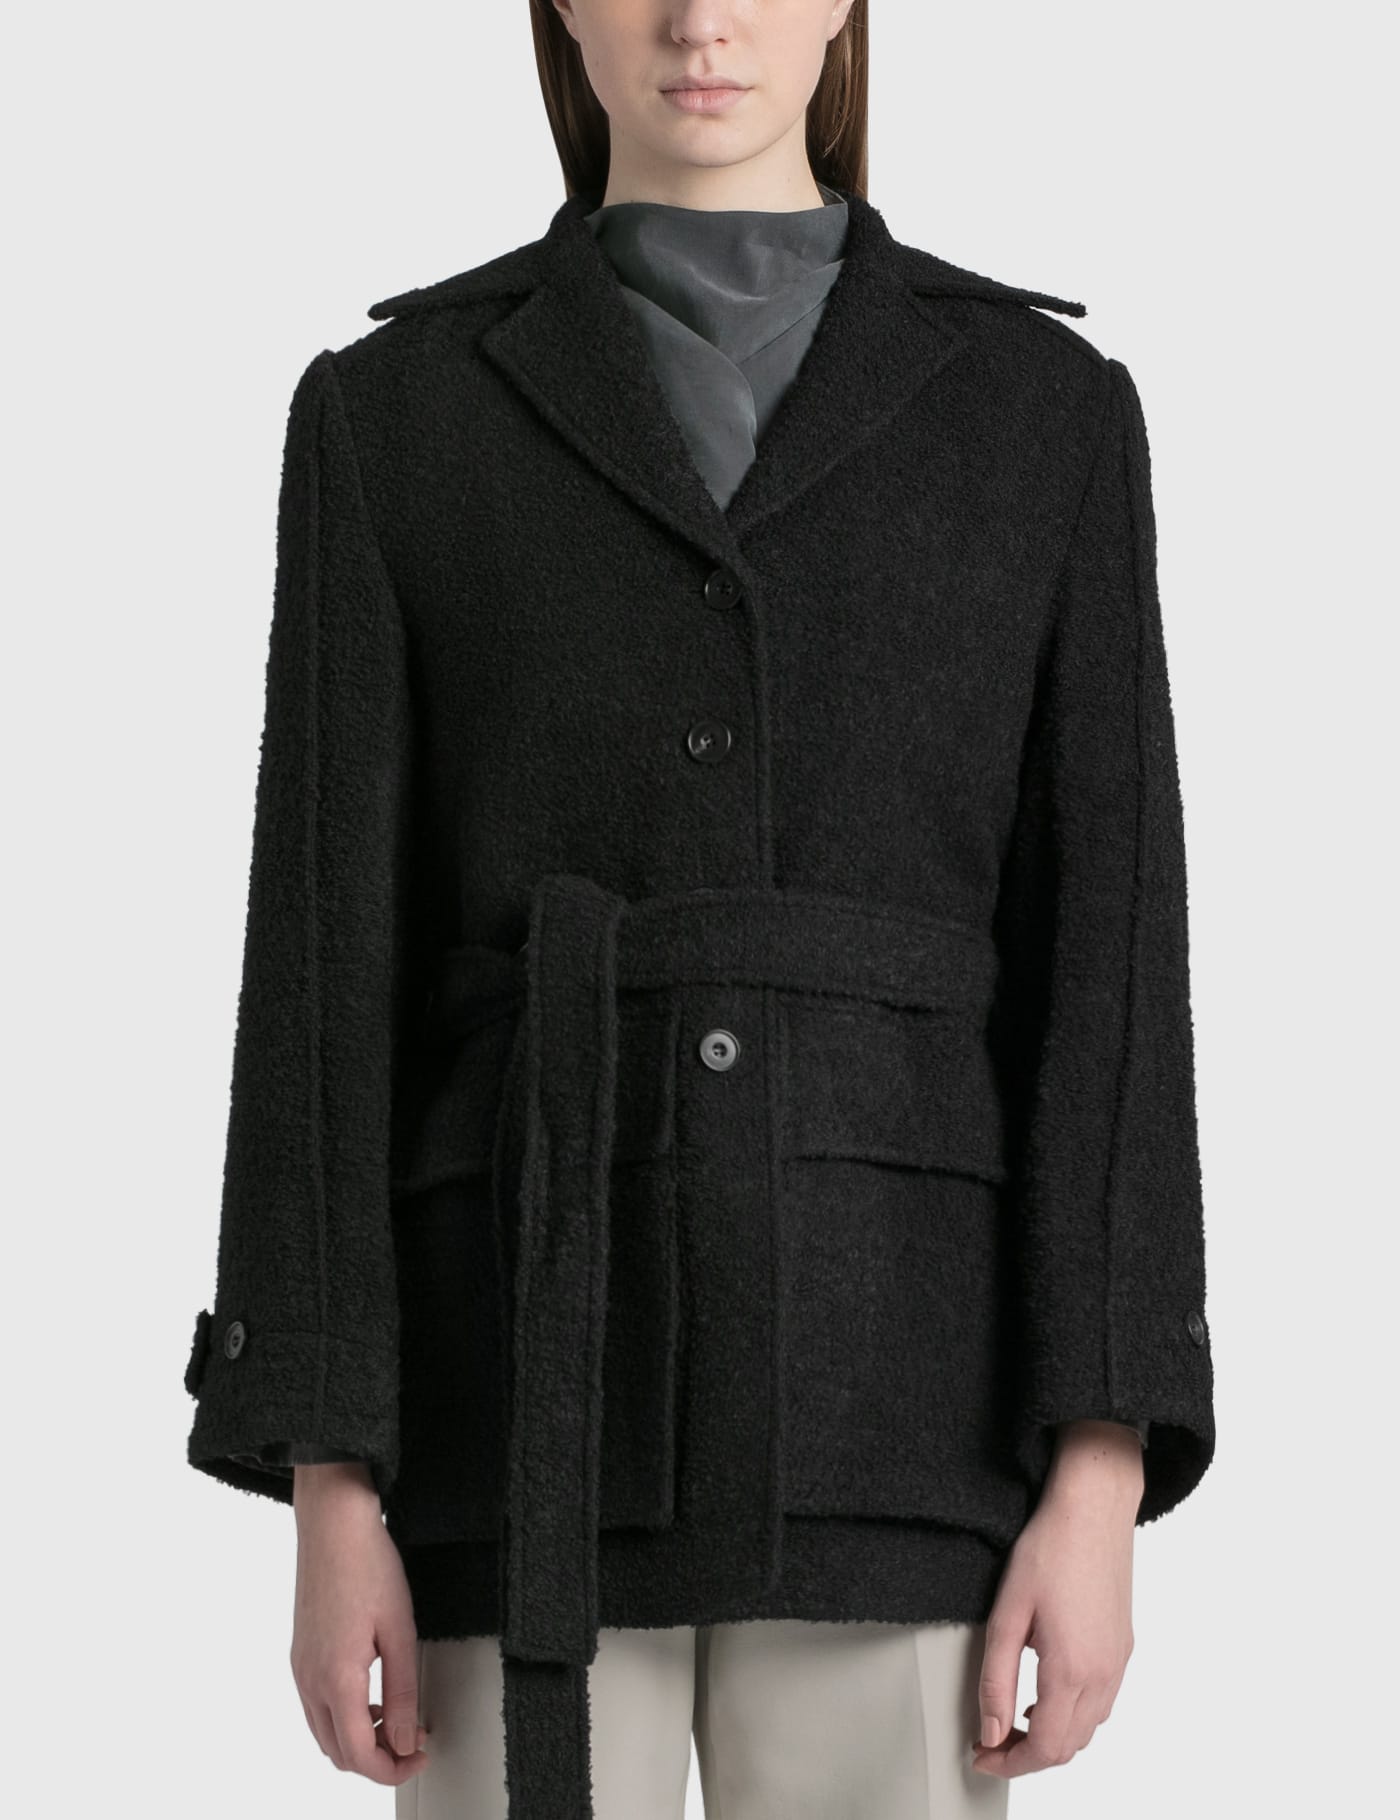 Ader Error - Conak Blazer | HBX - Globally Curated Fashion and 